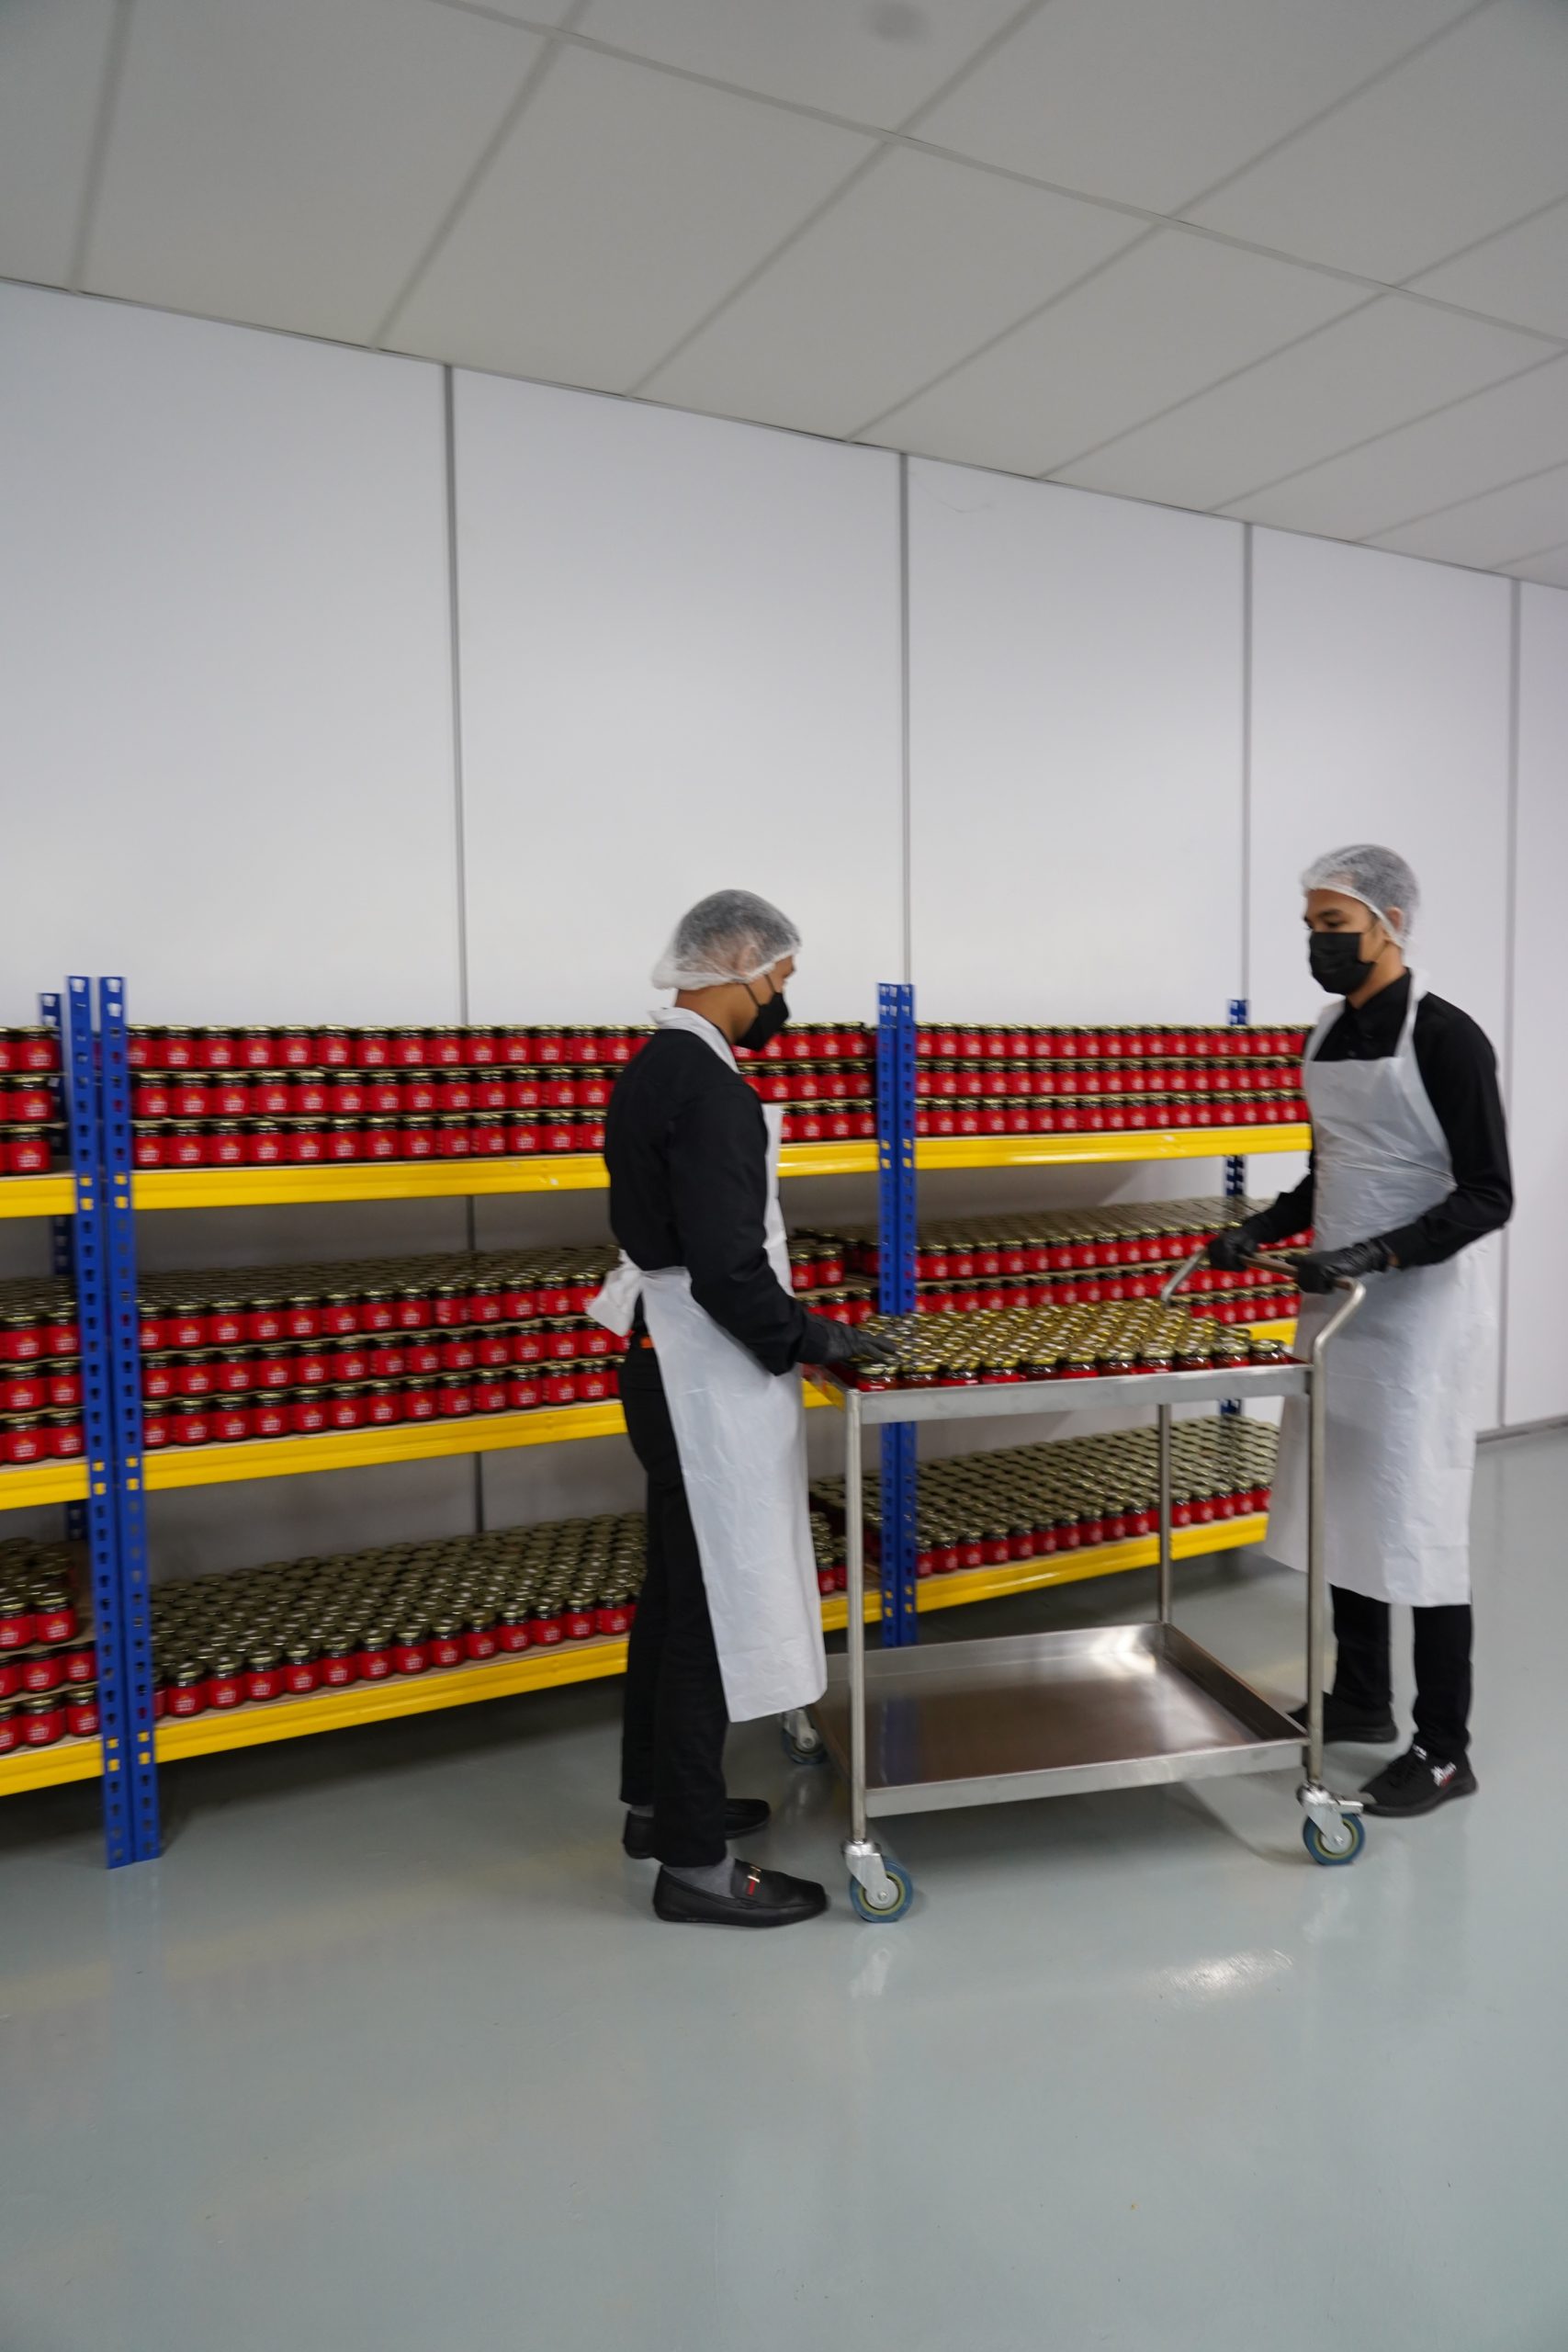 The success of Khairul Aming's Sambal Nyet brand has allowed him to take his business to the next level with two new factories. Image credit: khairulaming